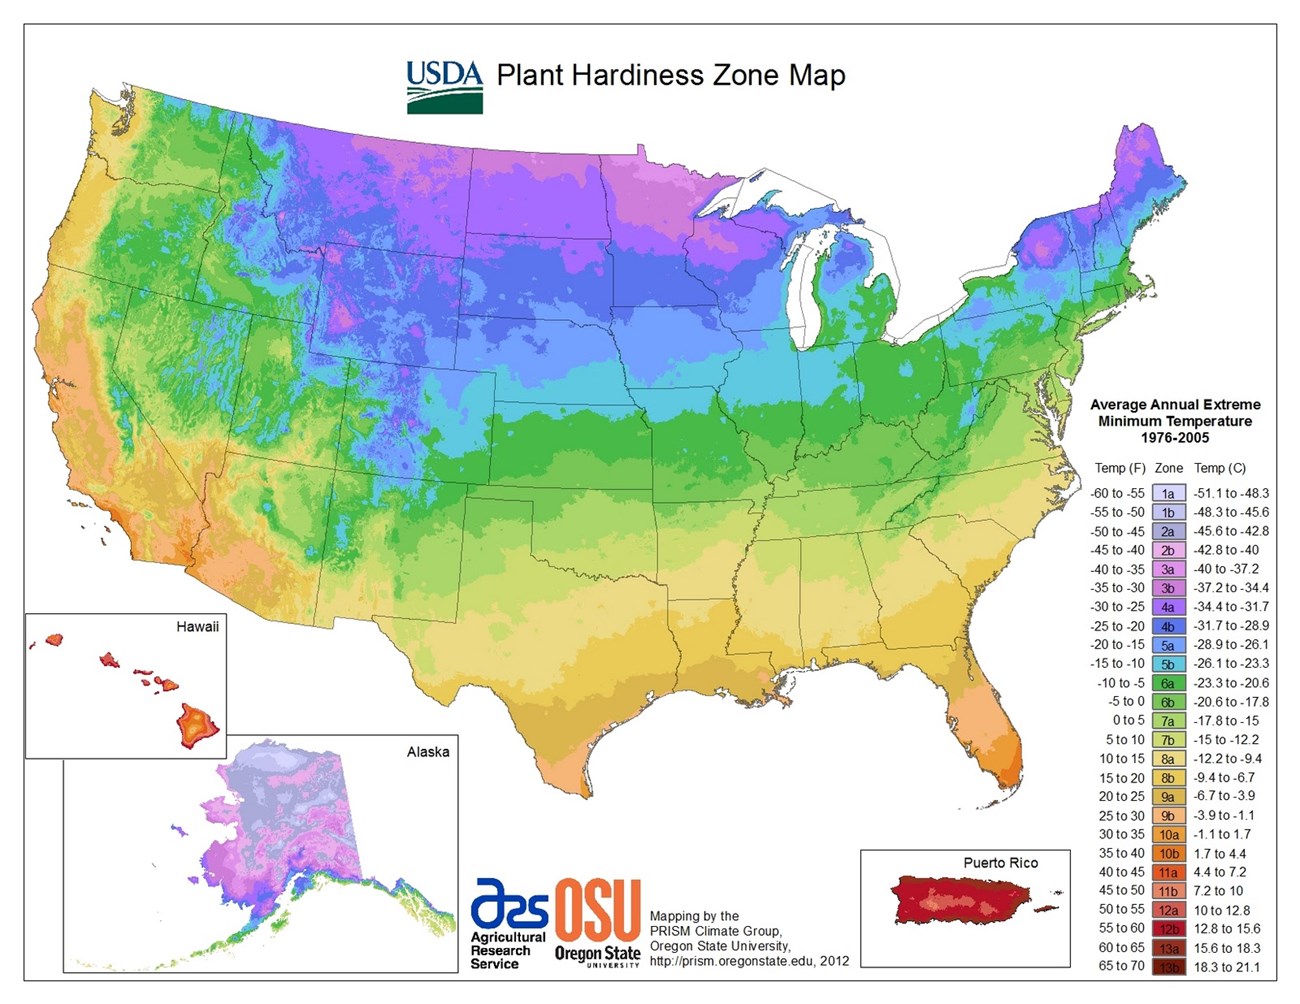 USDA Plant Hardiness Zone map: a map of the United States in colored bands indicating optimal growing zones